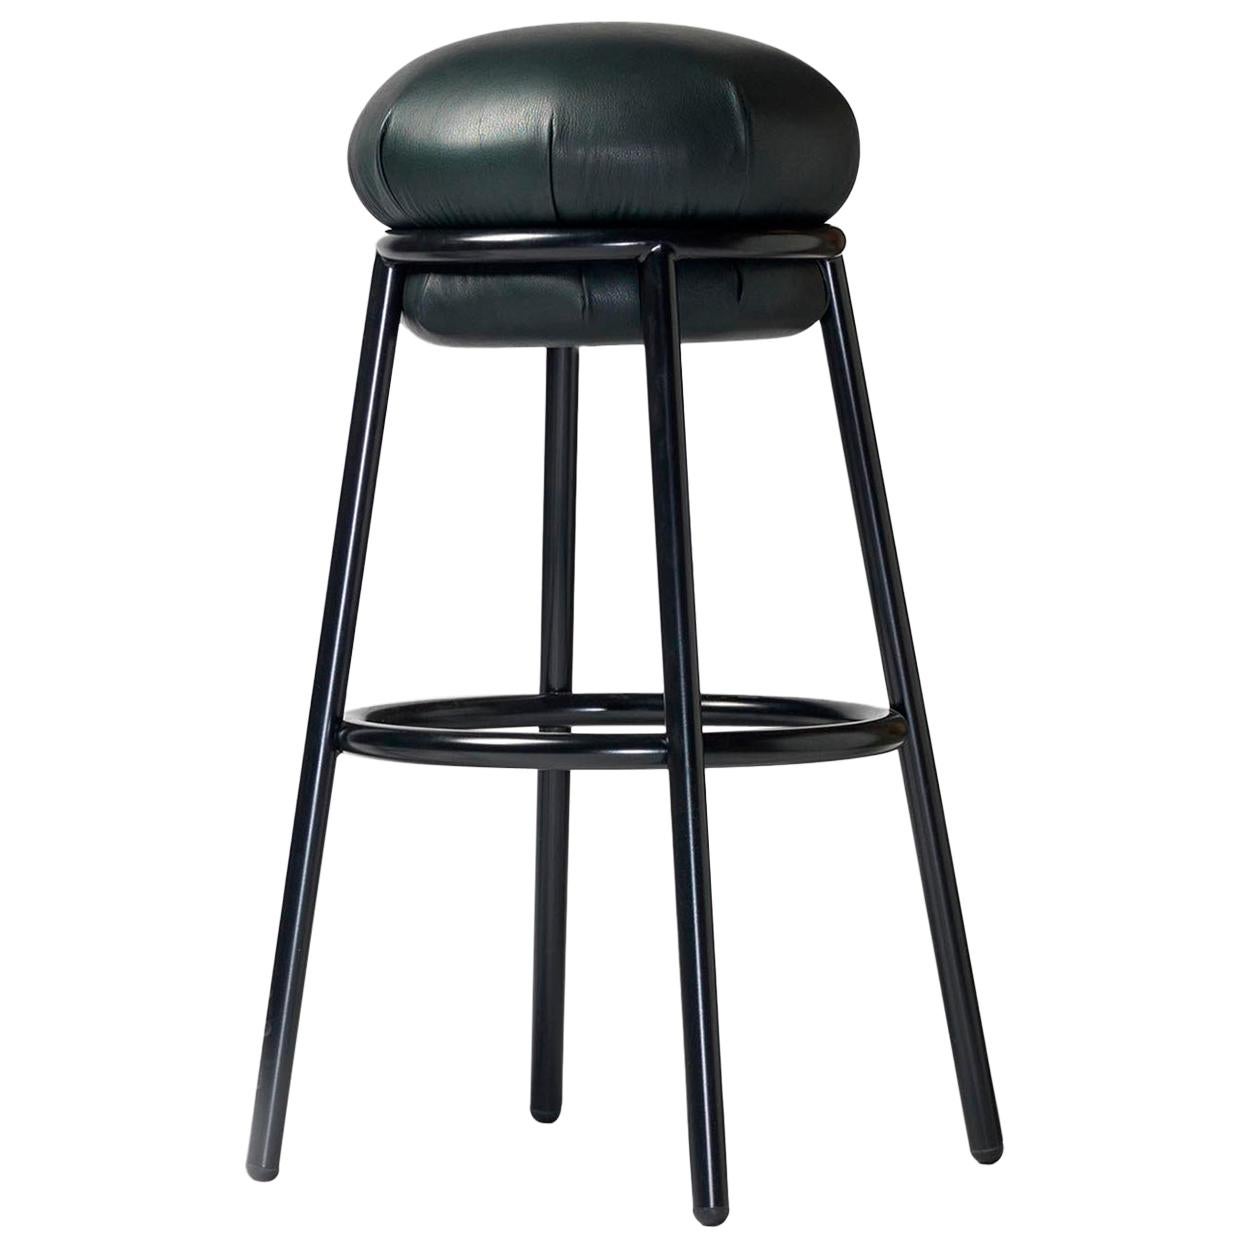 Contemporary bar stool "Grasso" by Stephen Burks, black lacquered, green leather